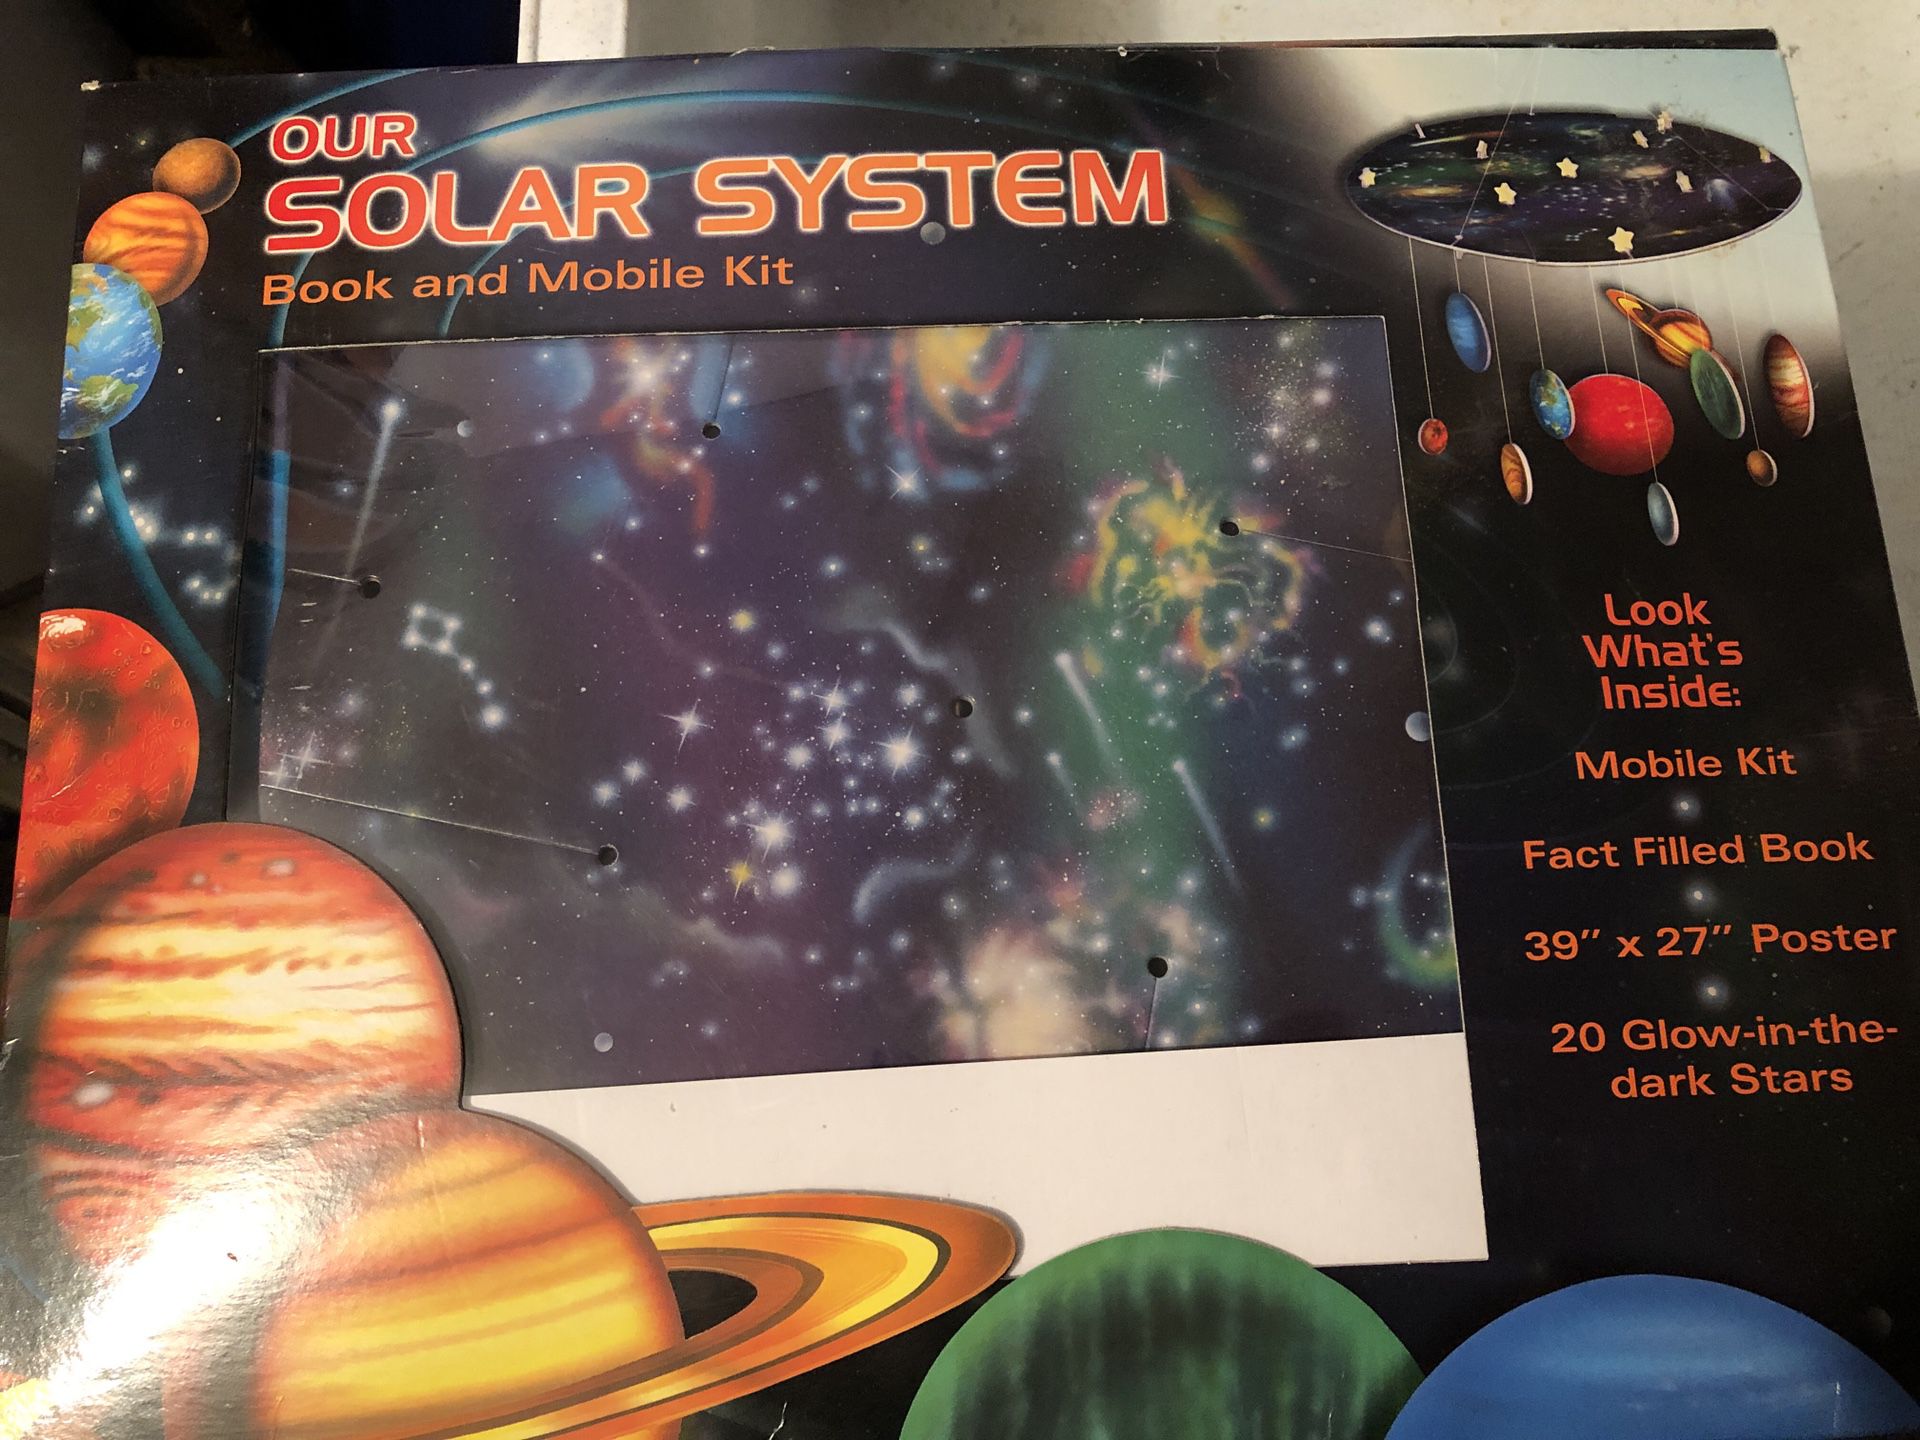 Solar system book and mobile kit